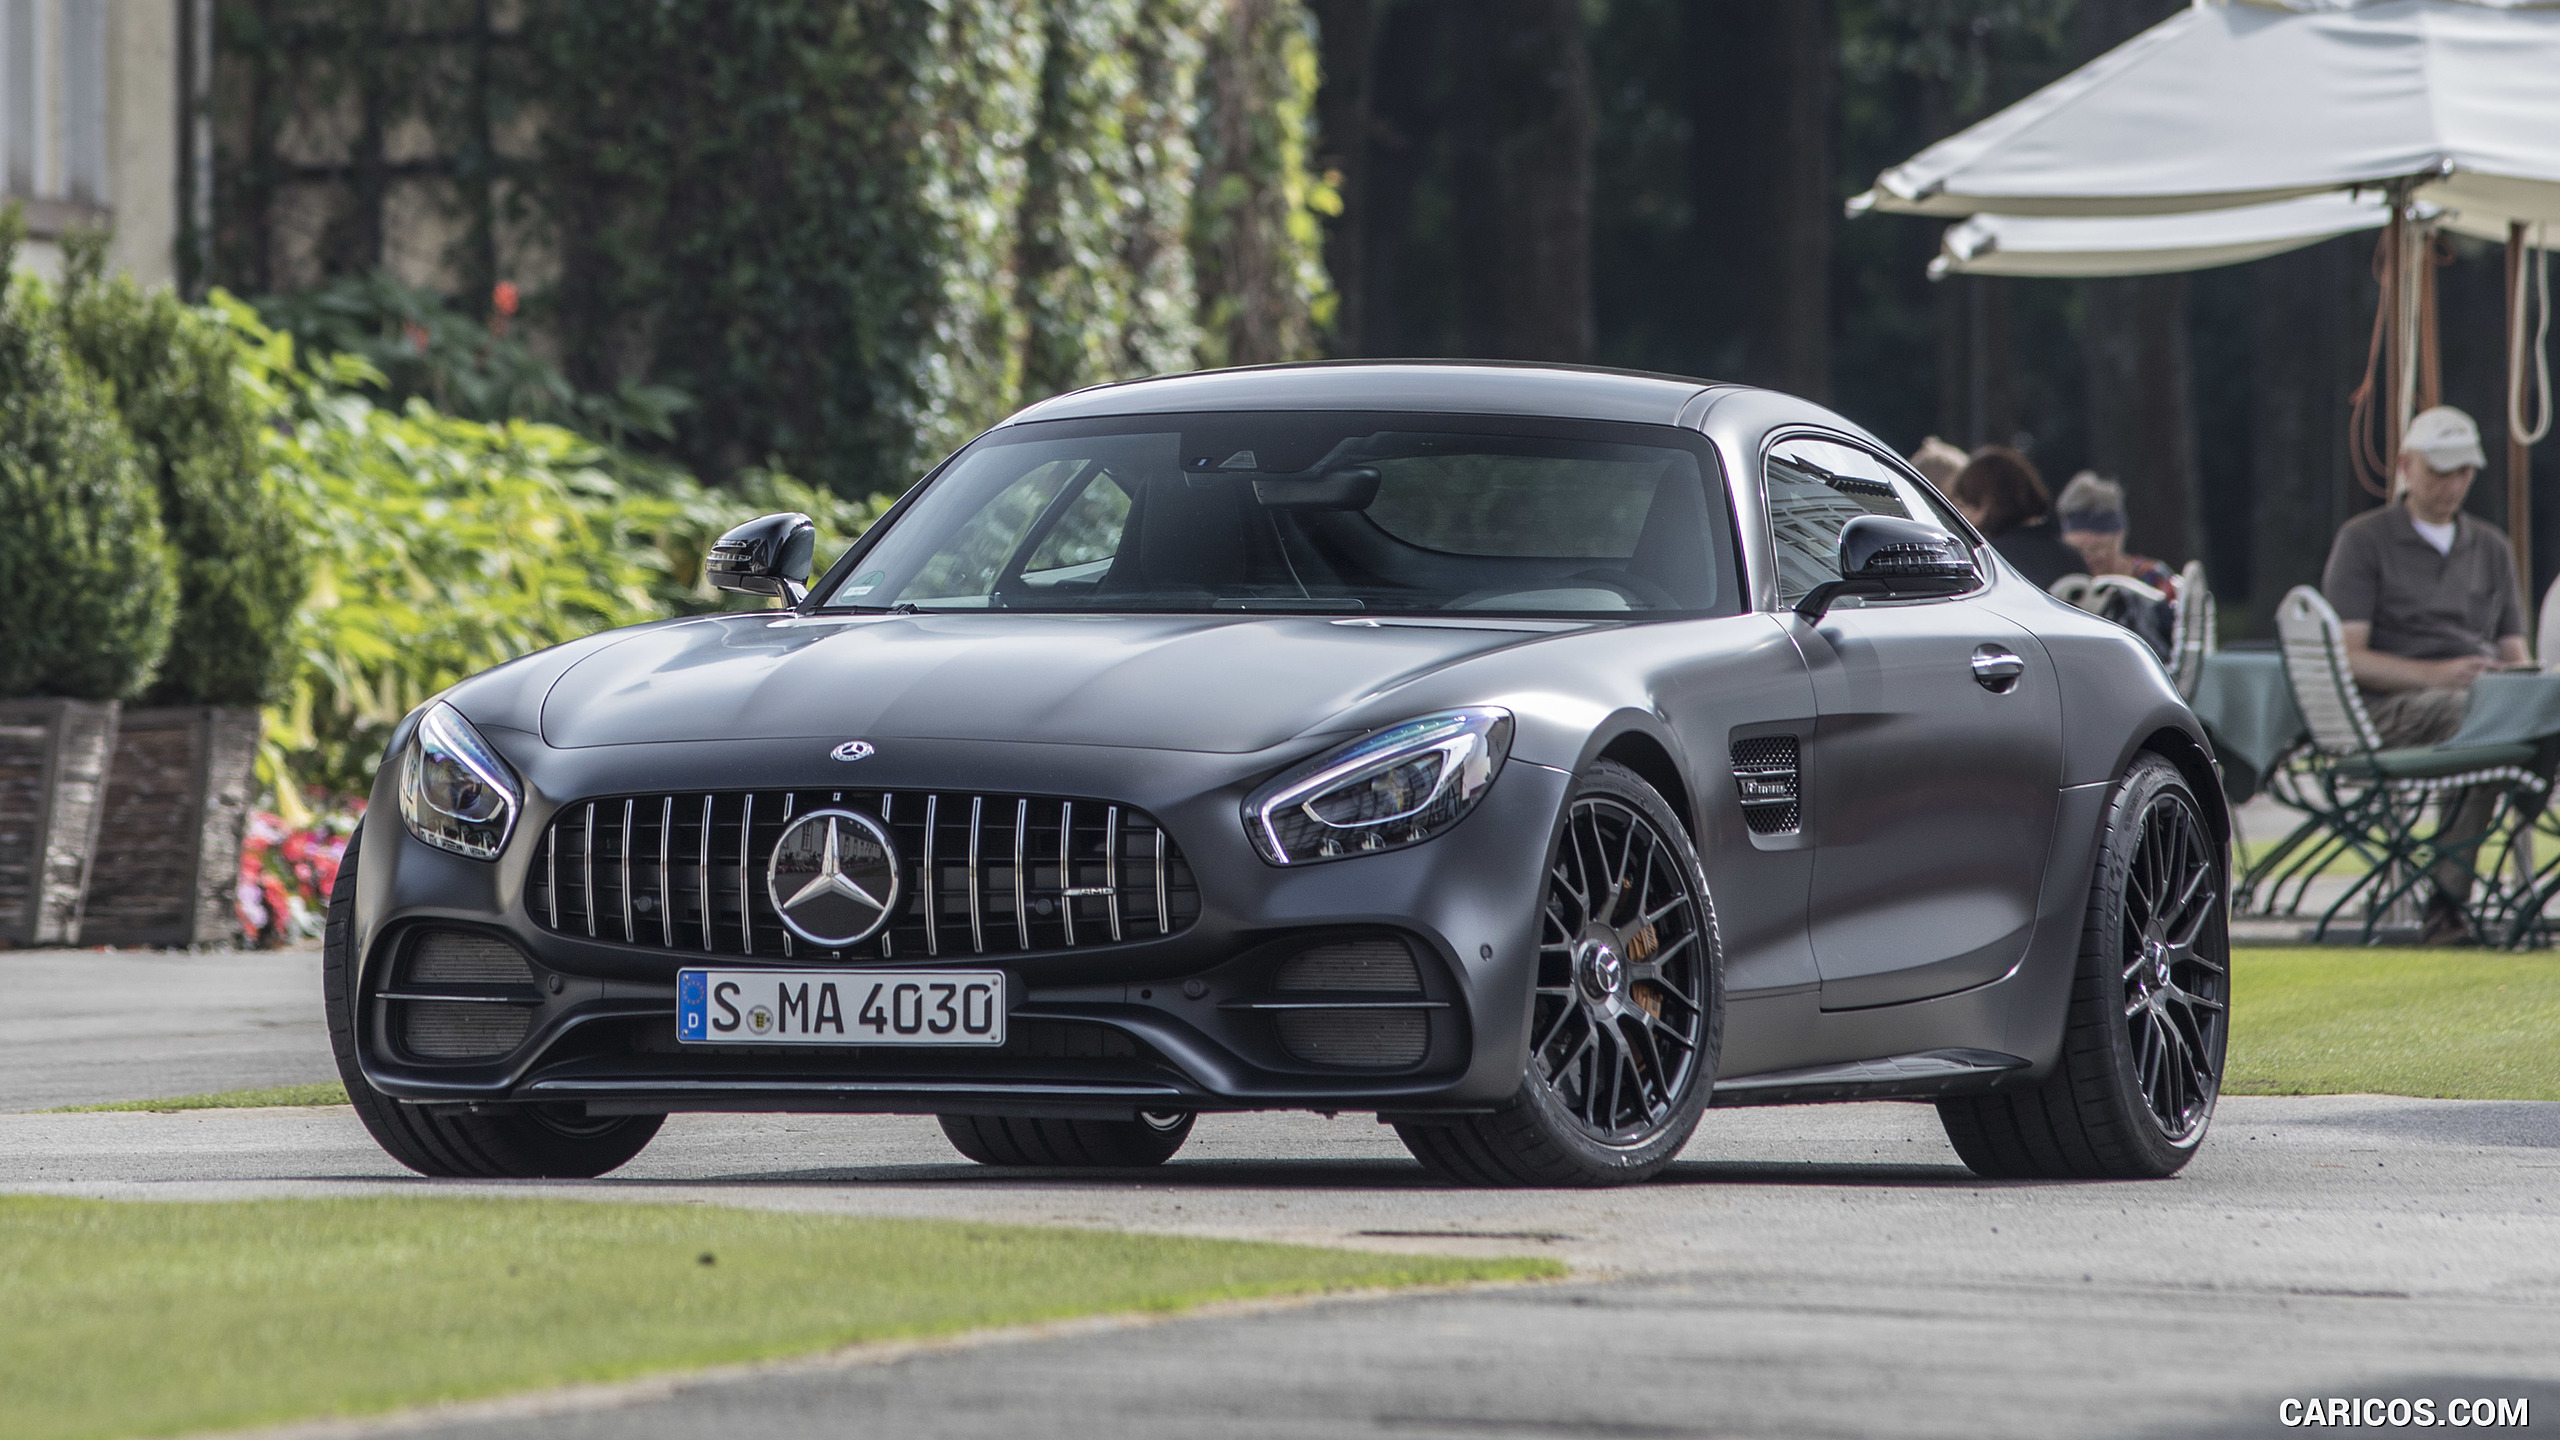 2018 Mercedes-AMG GT C Coupe Edition 50 - Front, #26 of 70